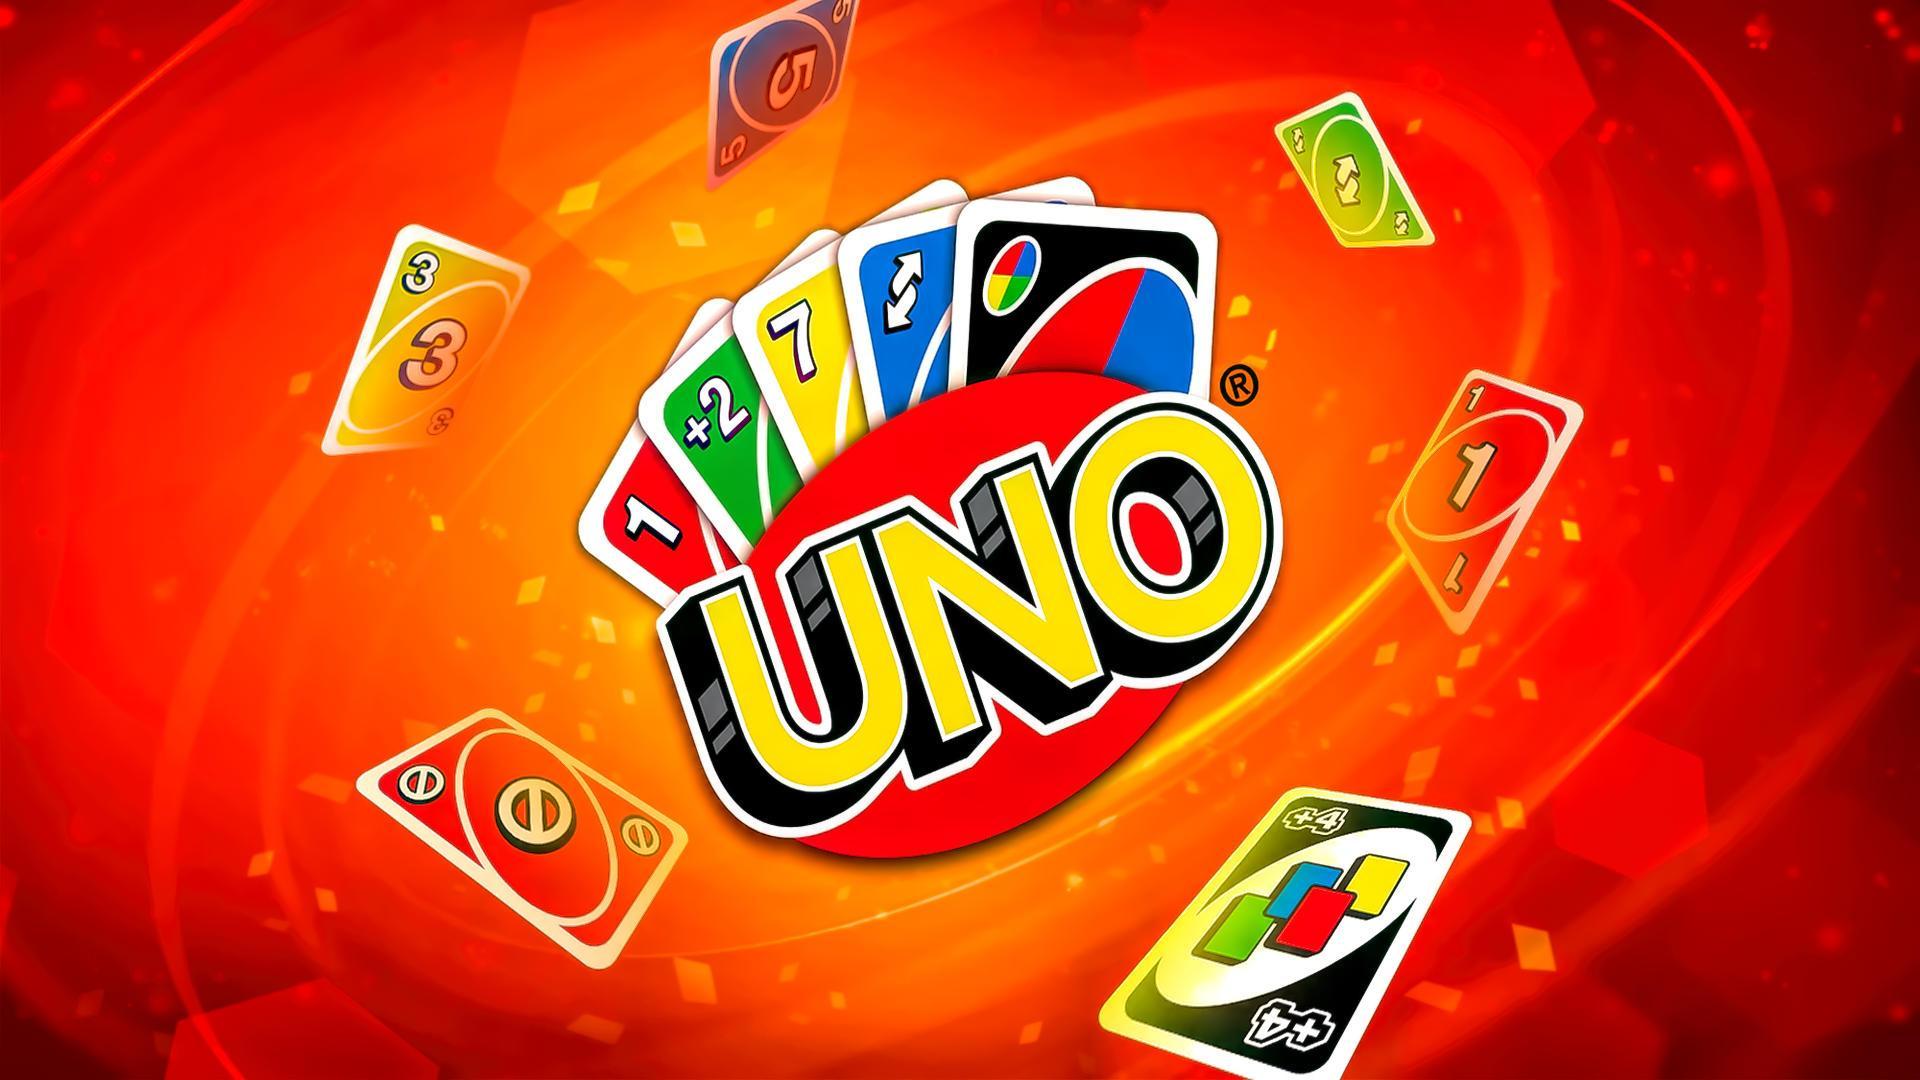 Uno Released on Mobile